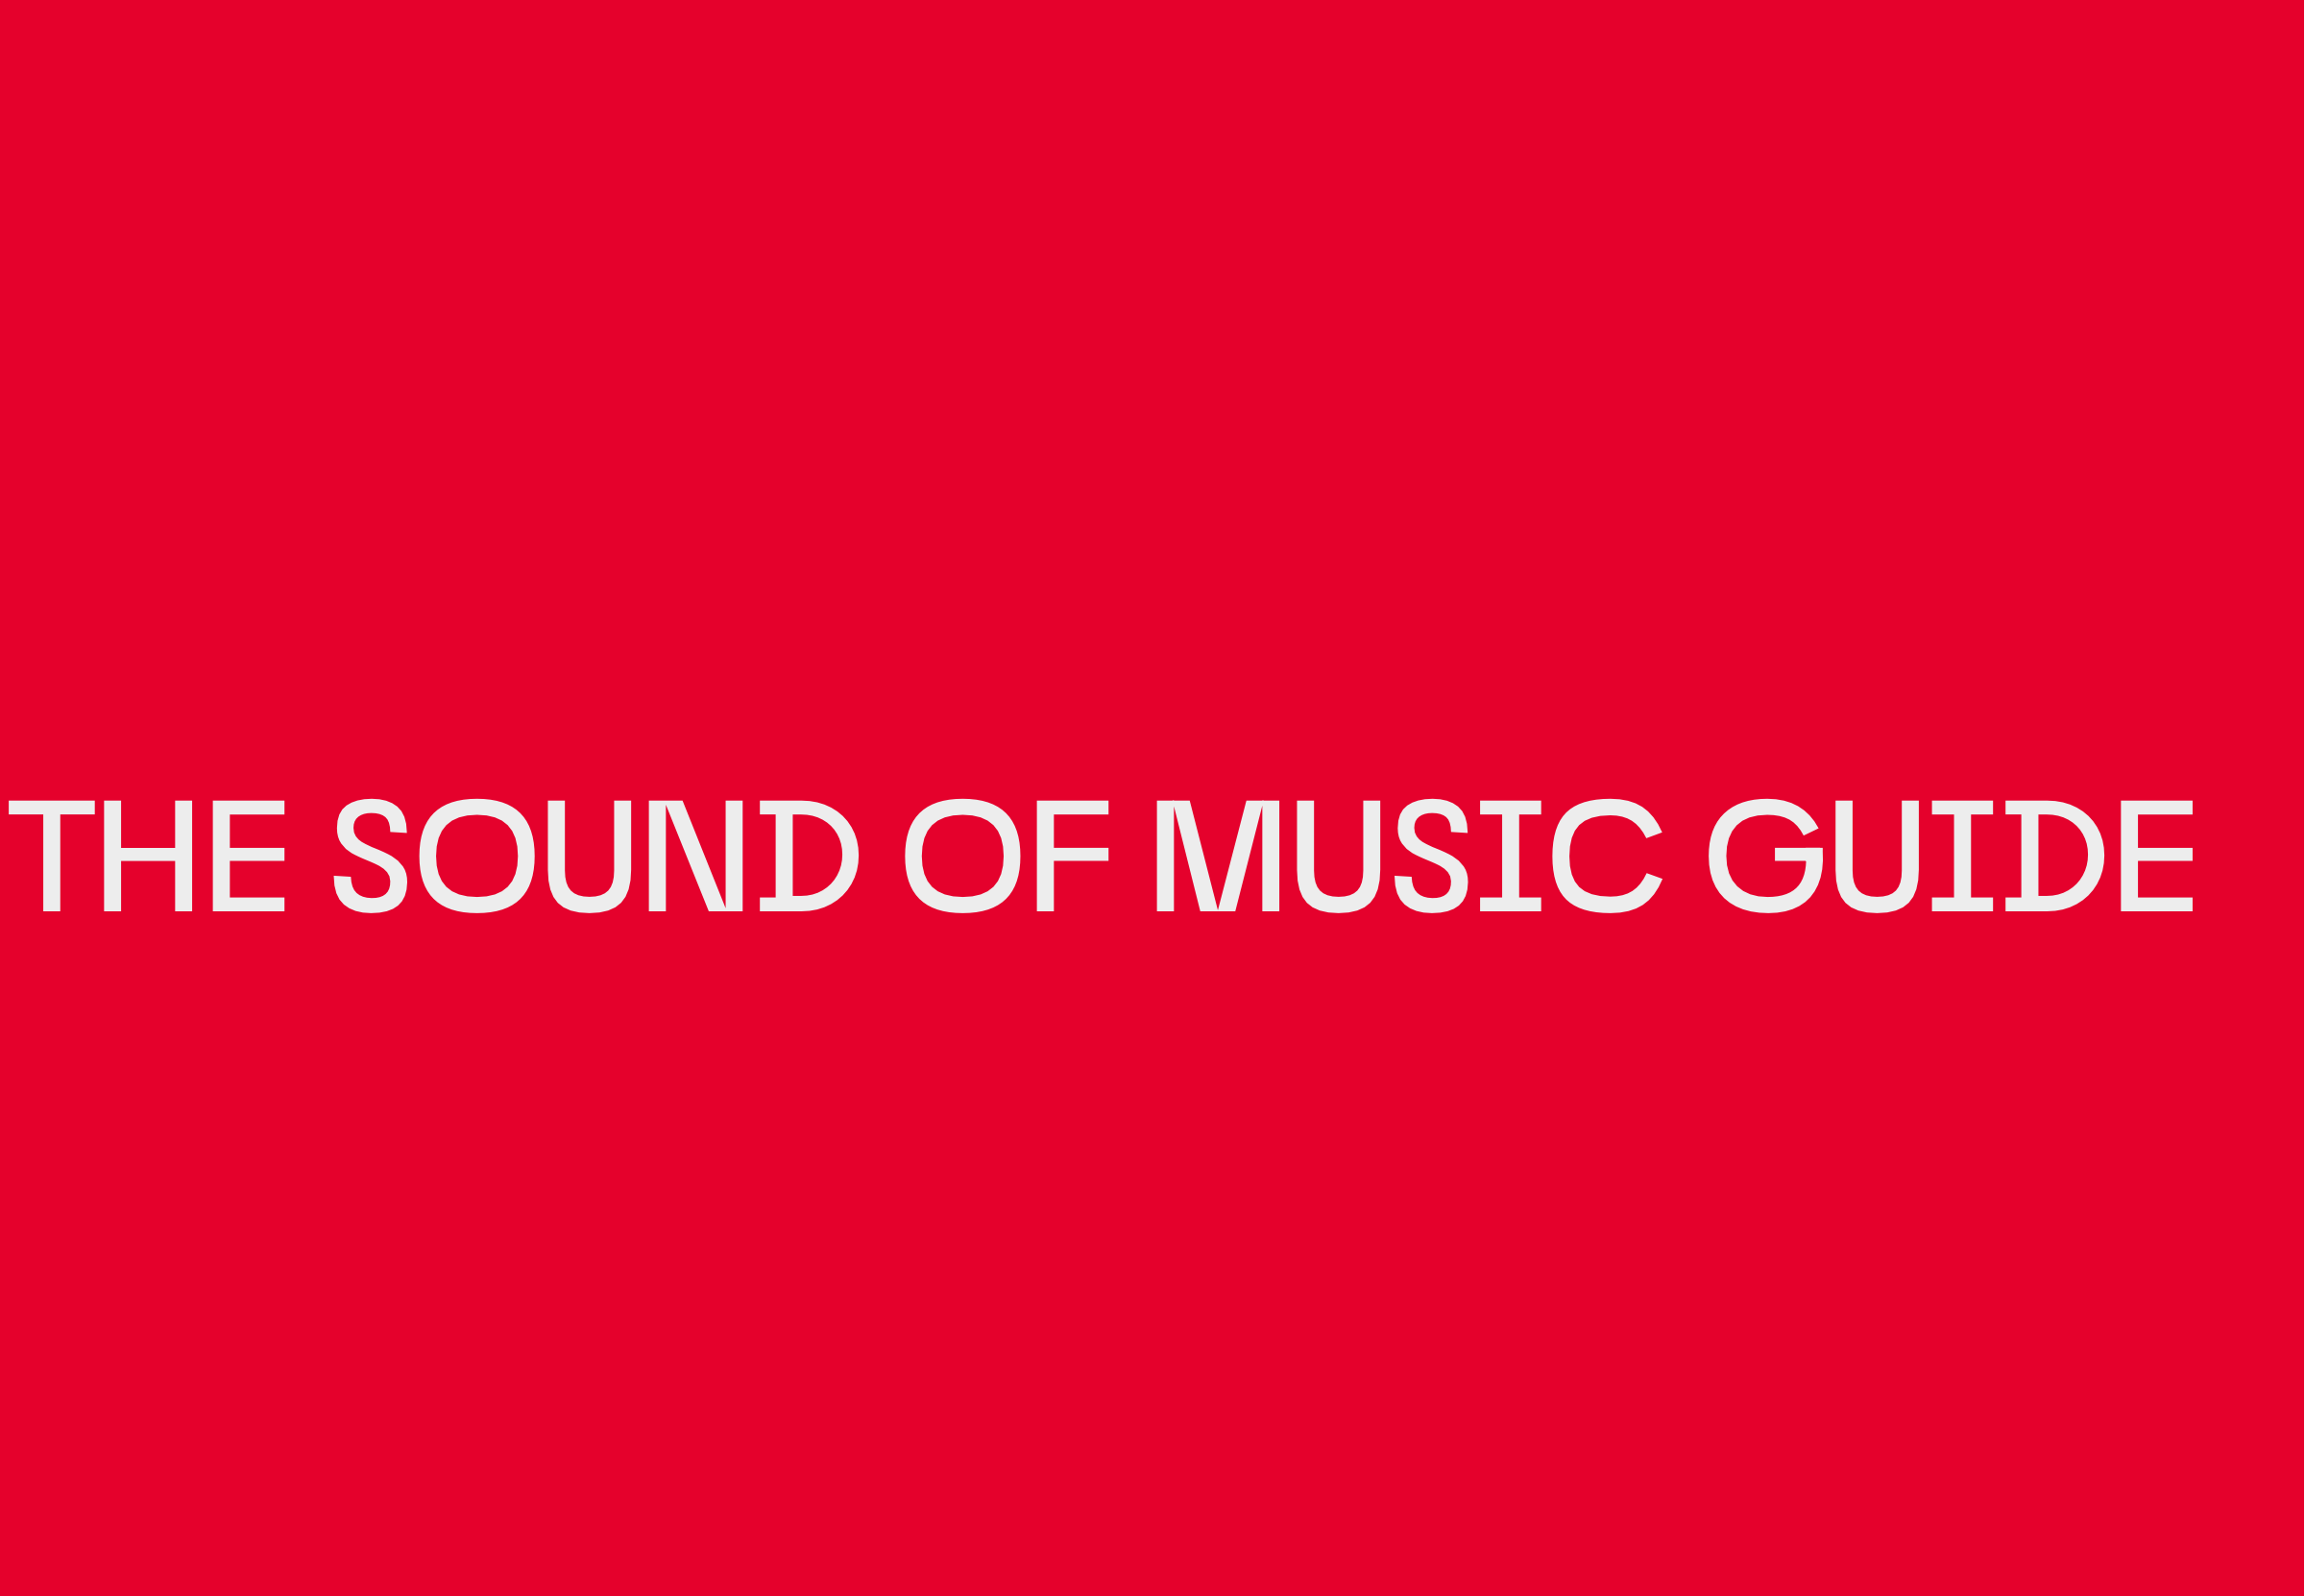 The Sound of Music Guide